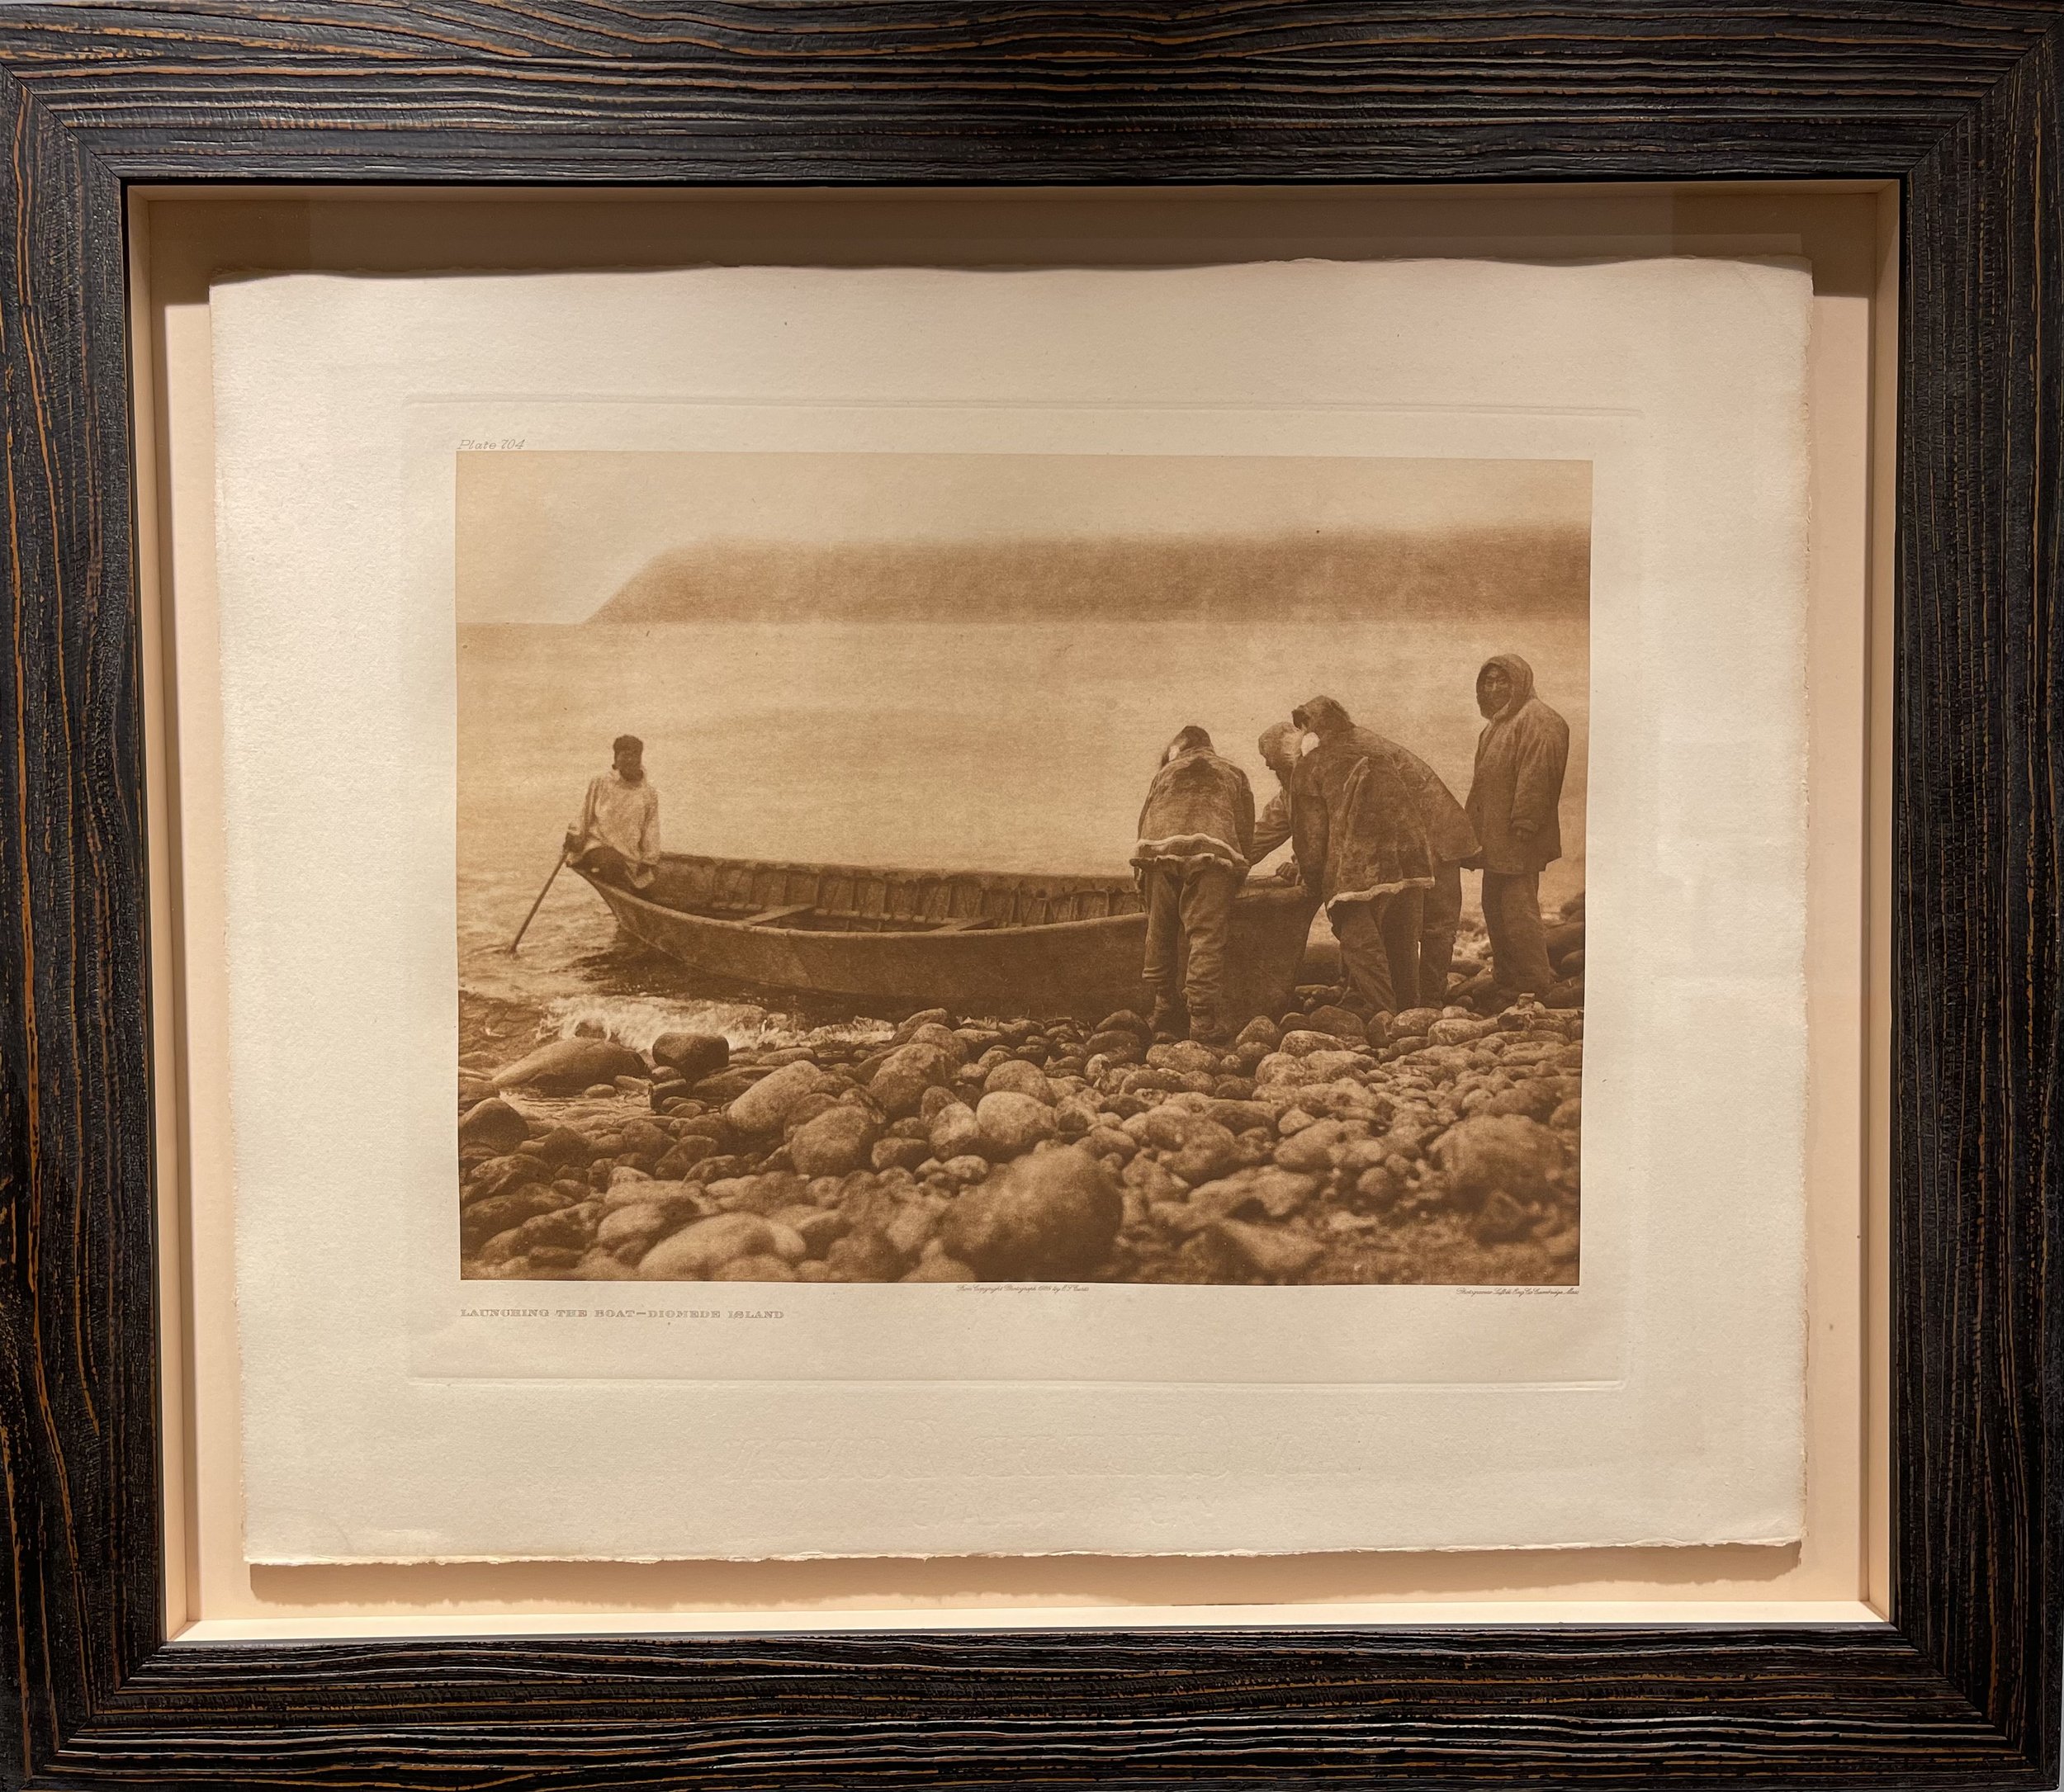 LAUNCHING THE BOAT — LITTLE DIOMEDE ISLAND